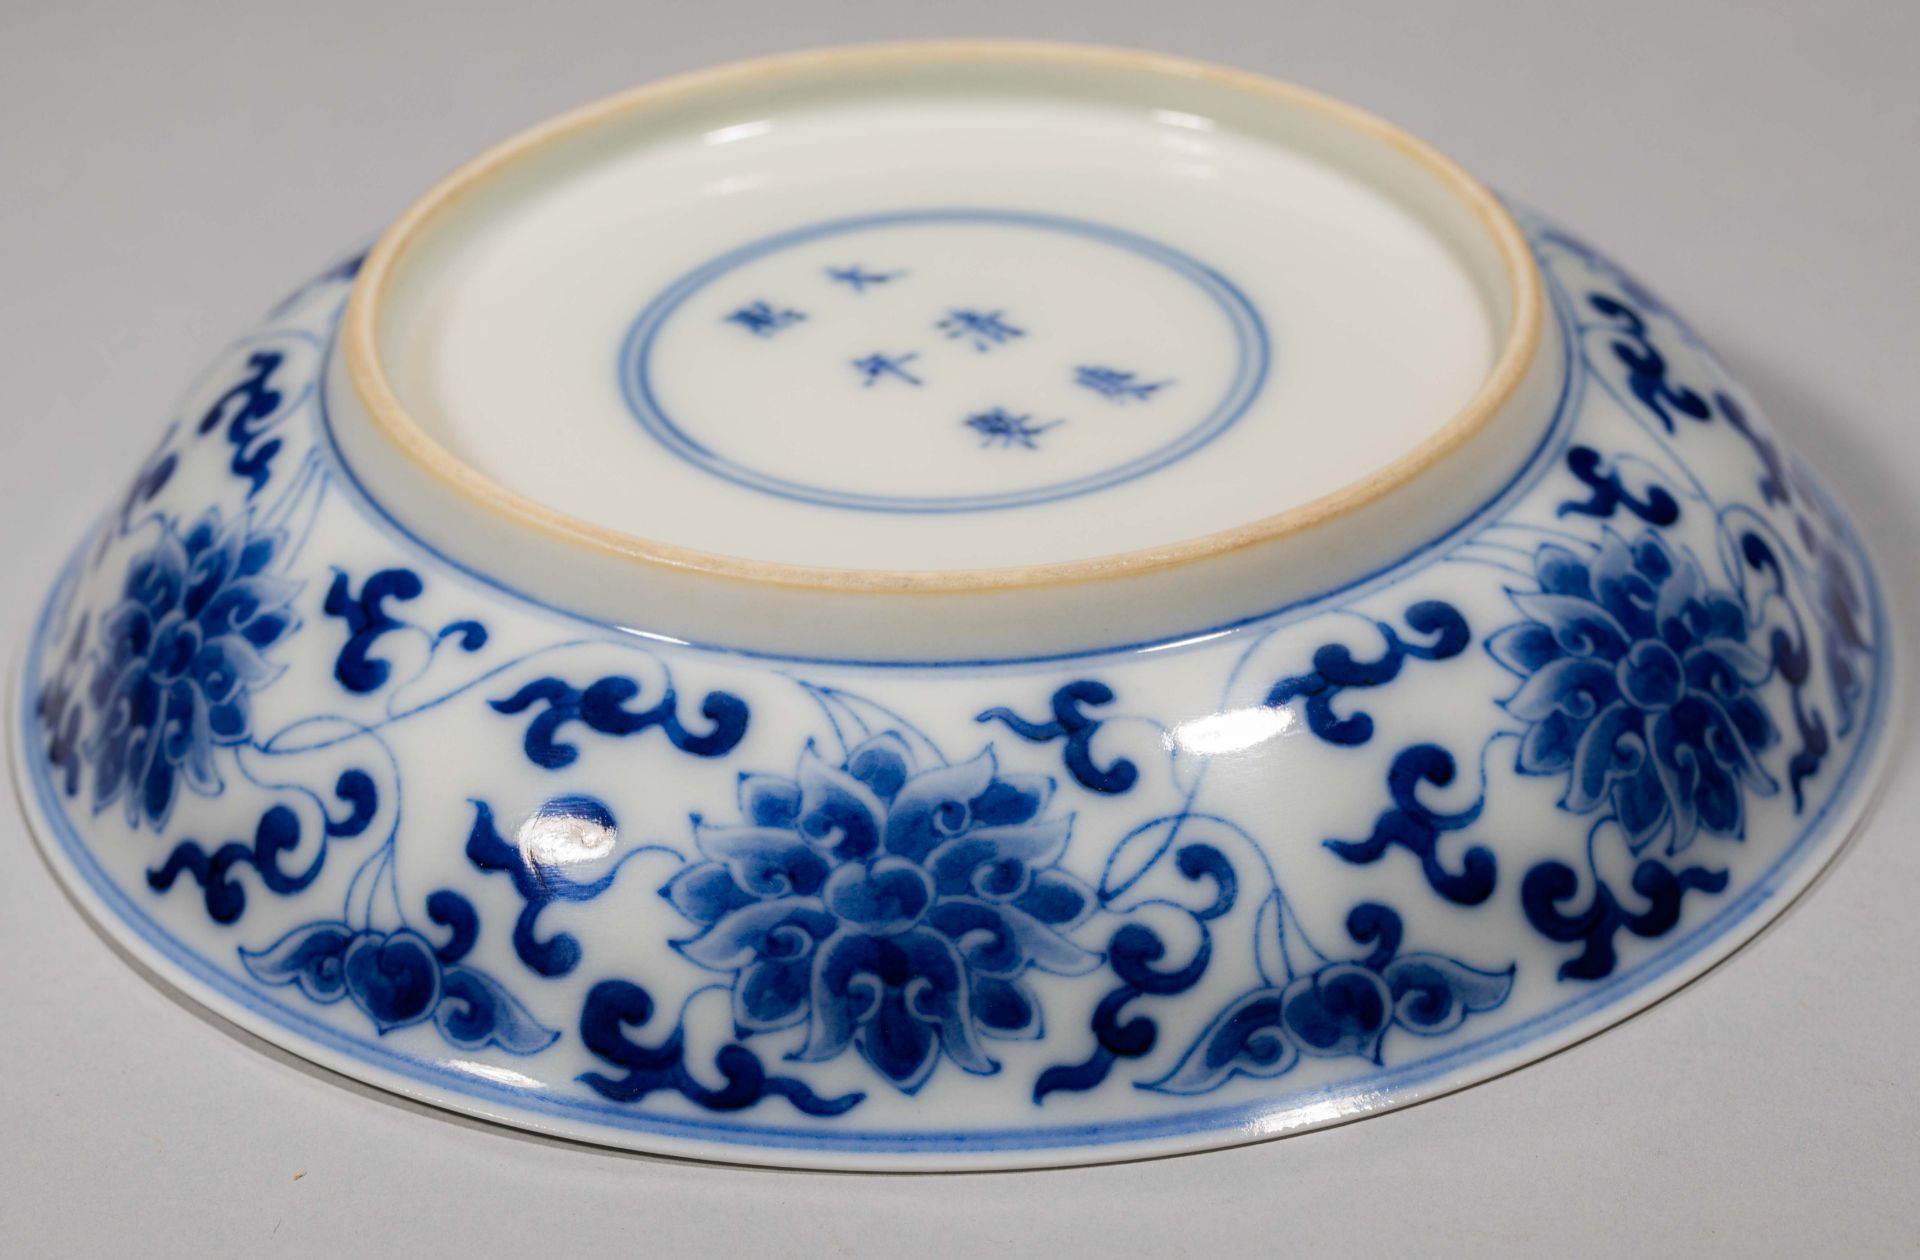 Chinese Qing Dynasty Kangxi style blue and white plate - Image 5 of 7